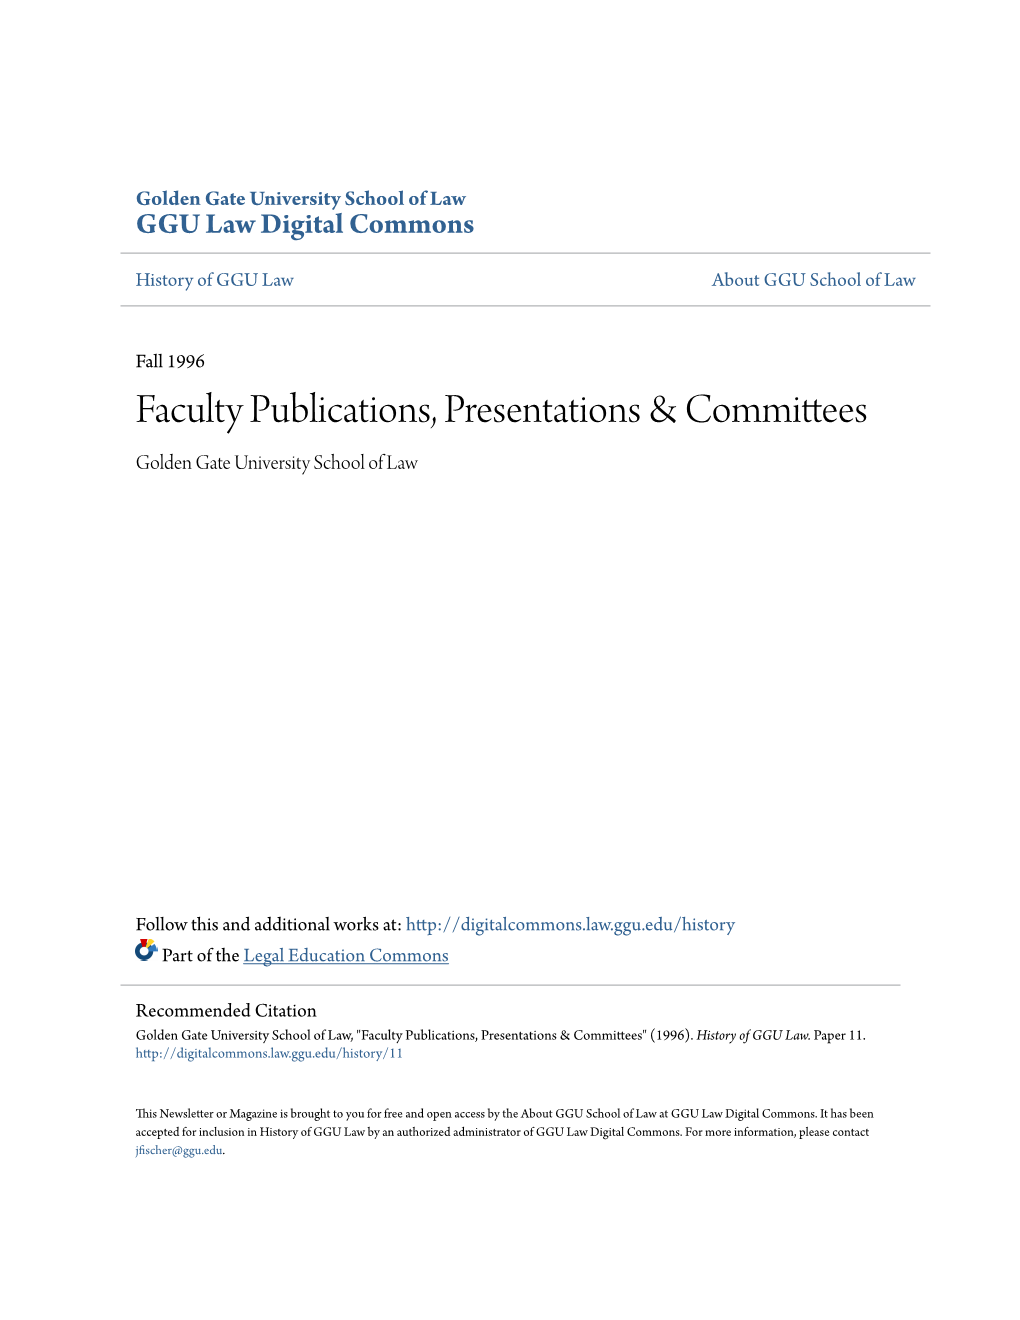 Faculty Publications, Presentations & Committees